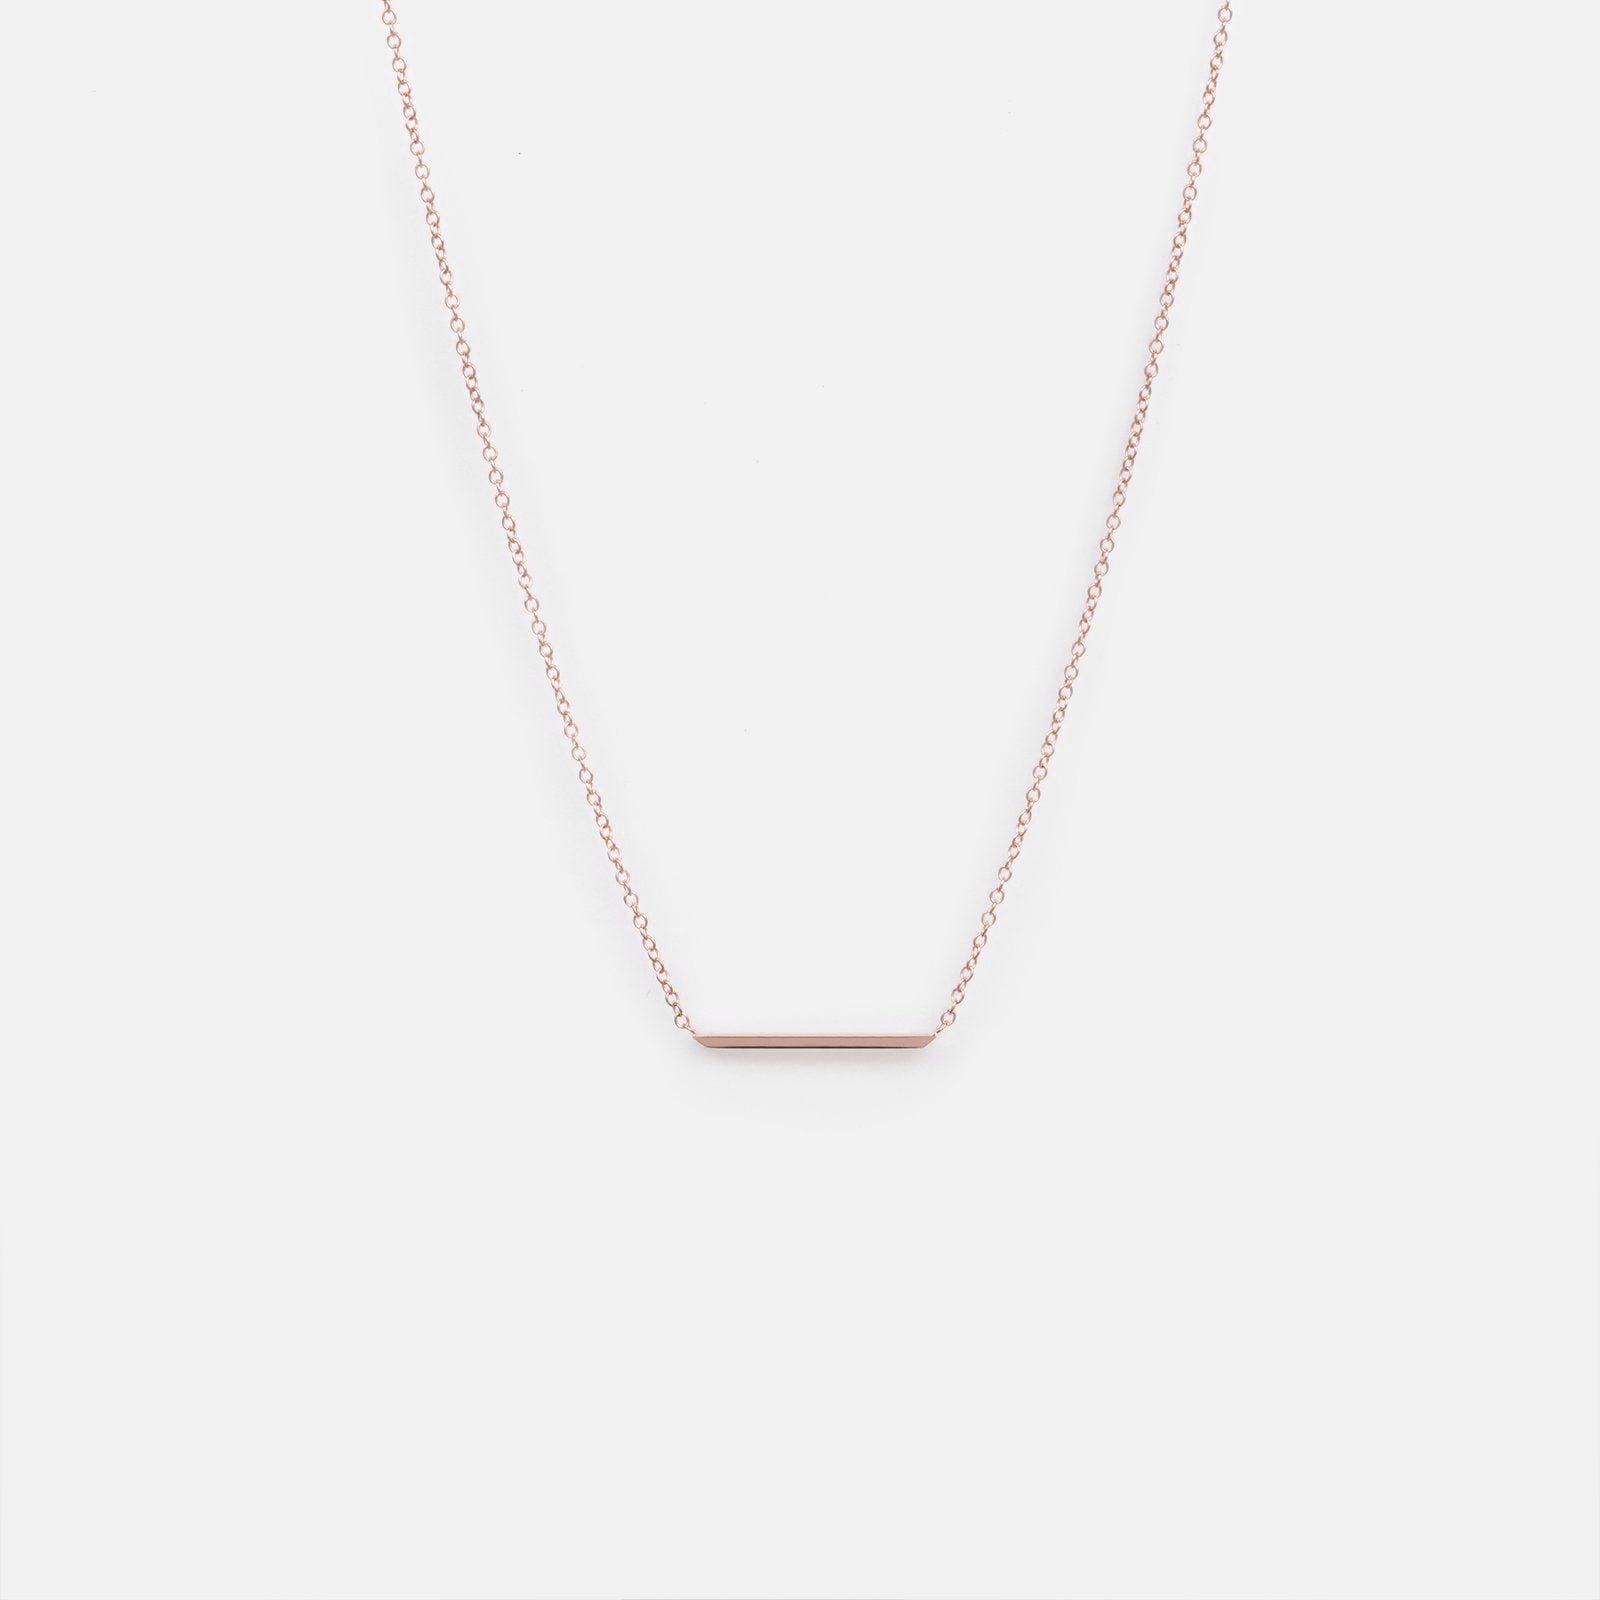 Minimal Vati Necklace in 14k Yellow Gold by SHW Fine Jewelry Made in New York City